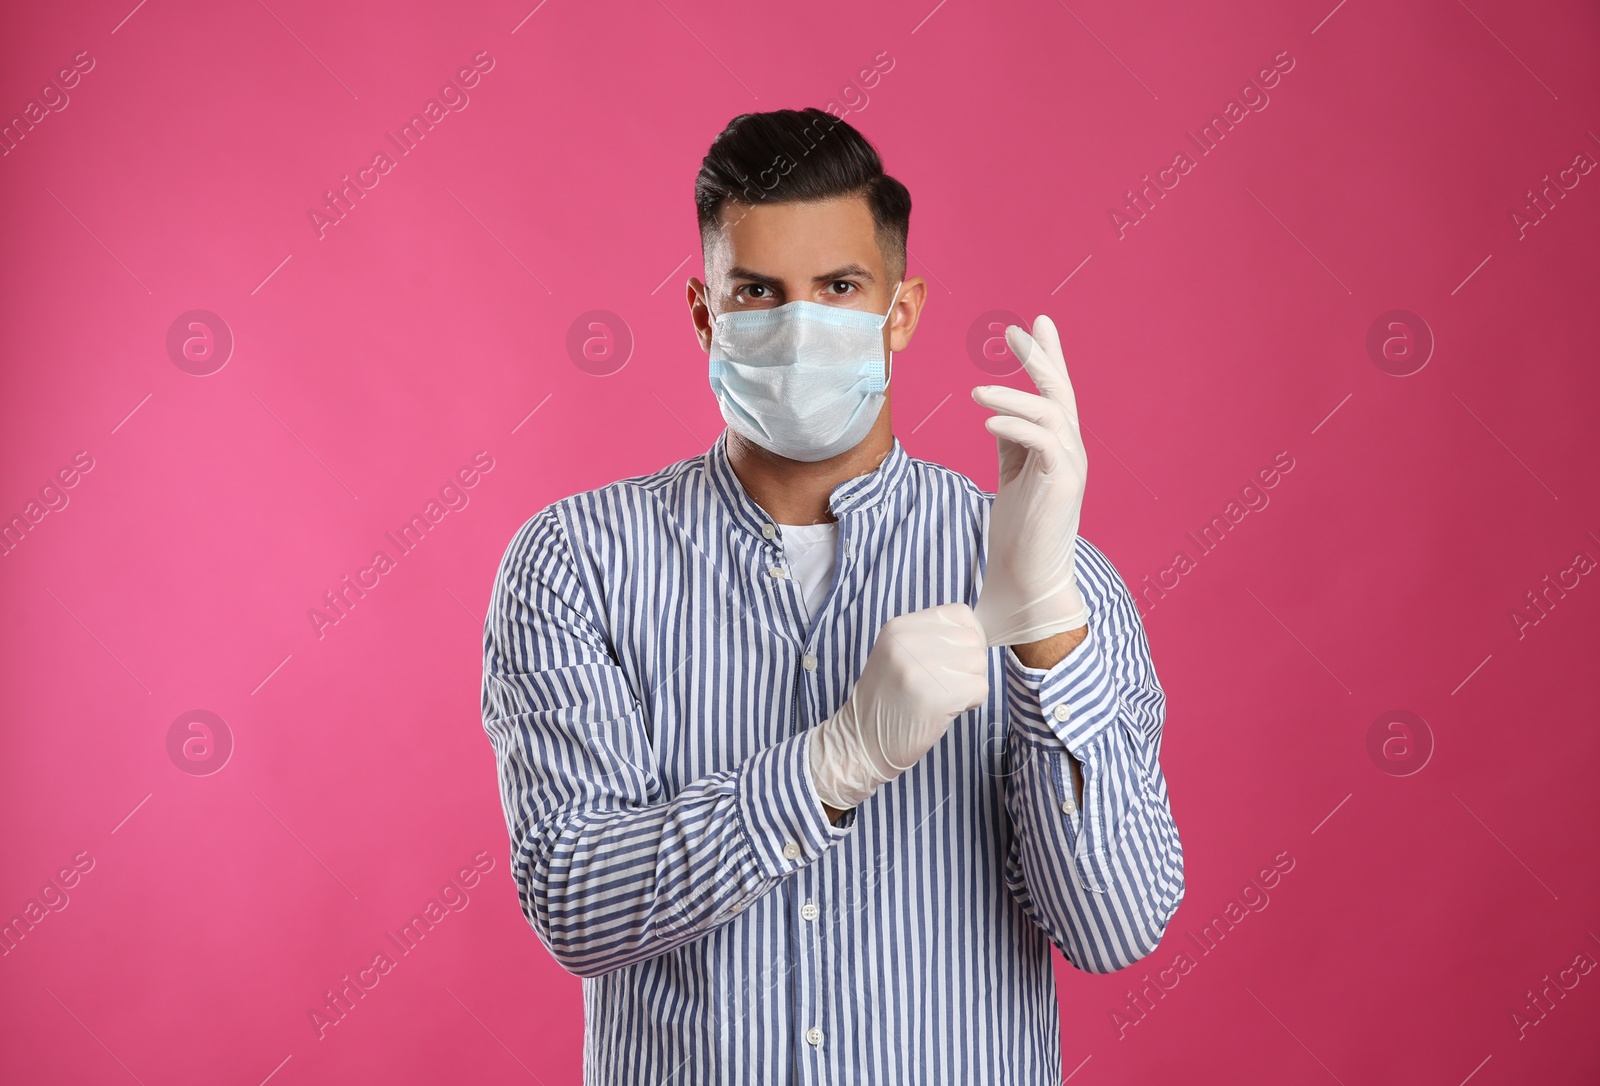 Photo of Man in protective face mask putting on medical gloves against pink background